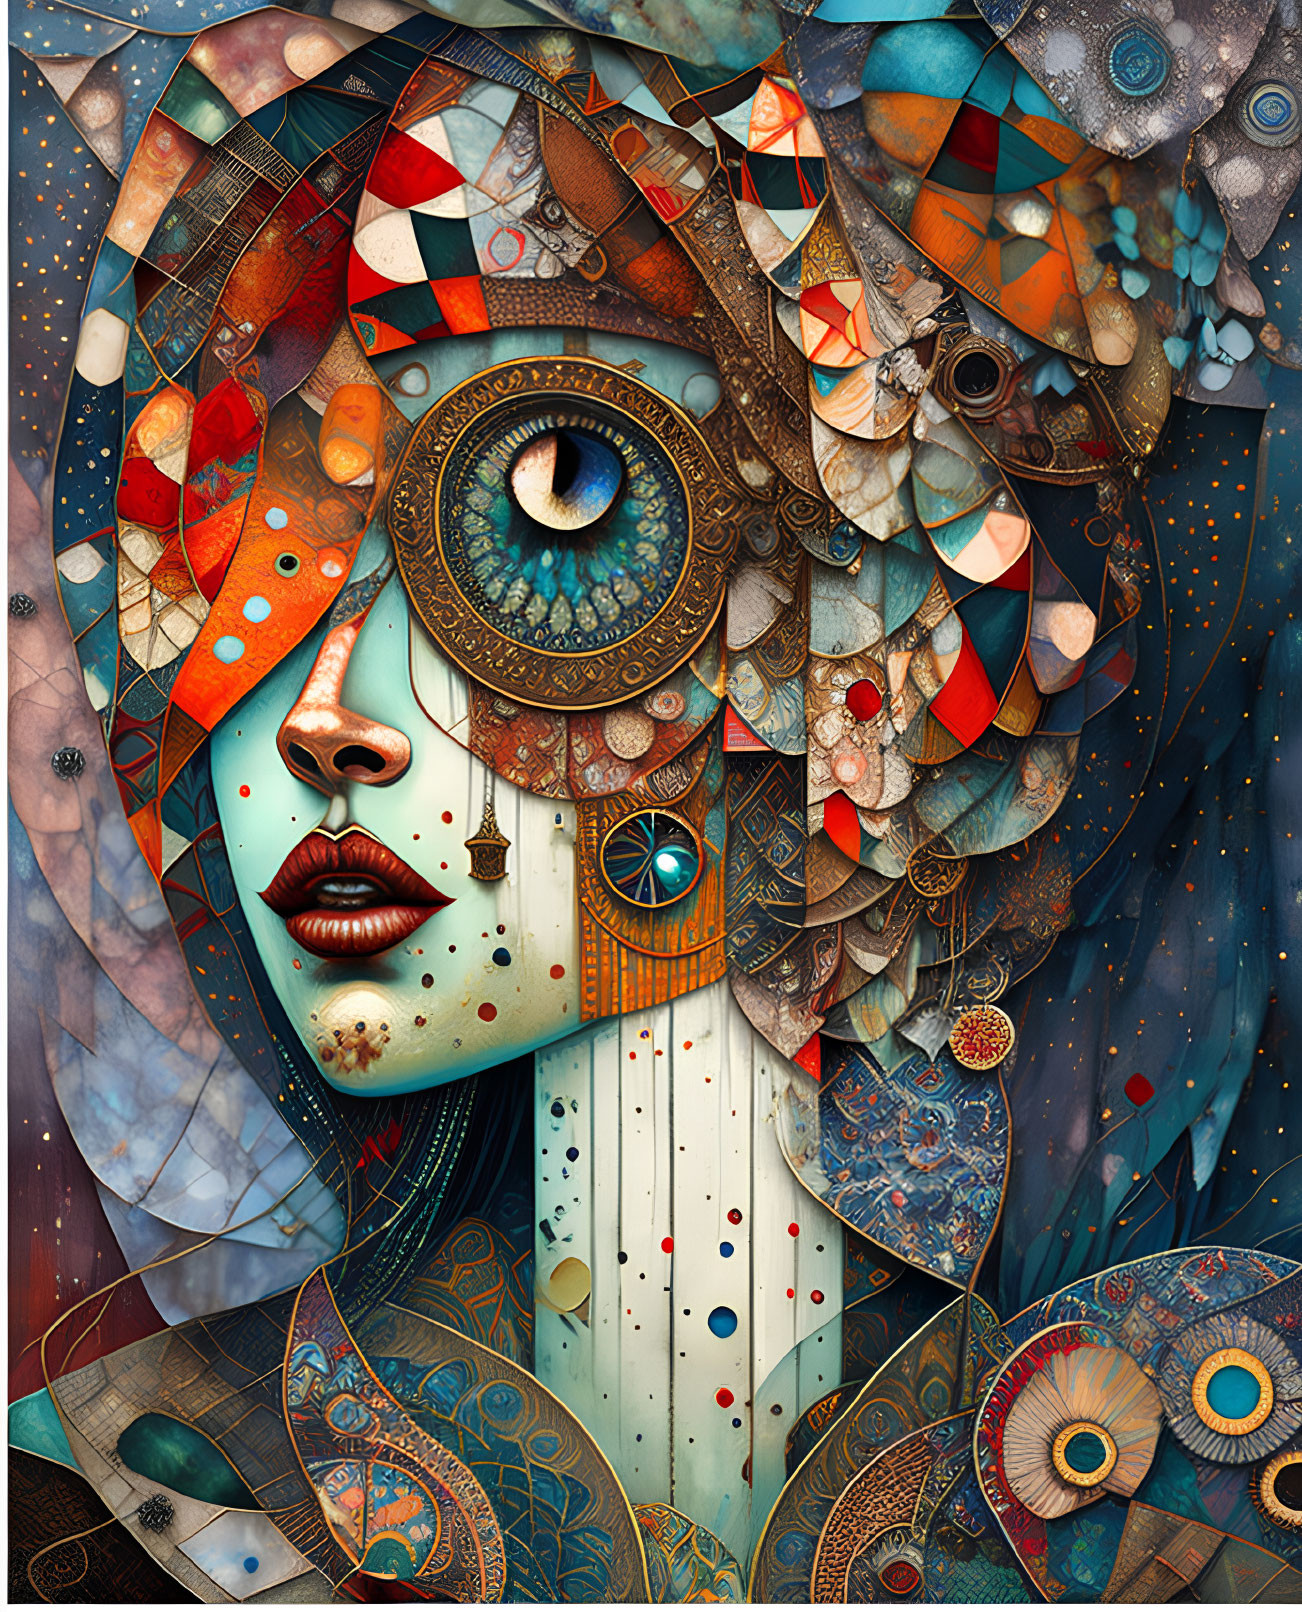 Vibrant surreal digital artwork of a detailed face with intricate patterns and textures